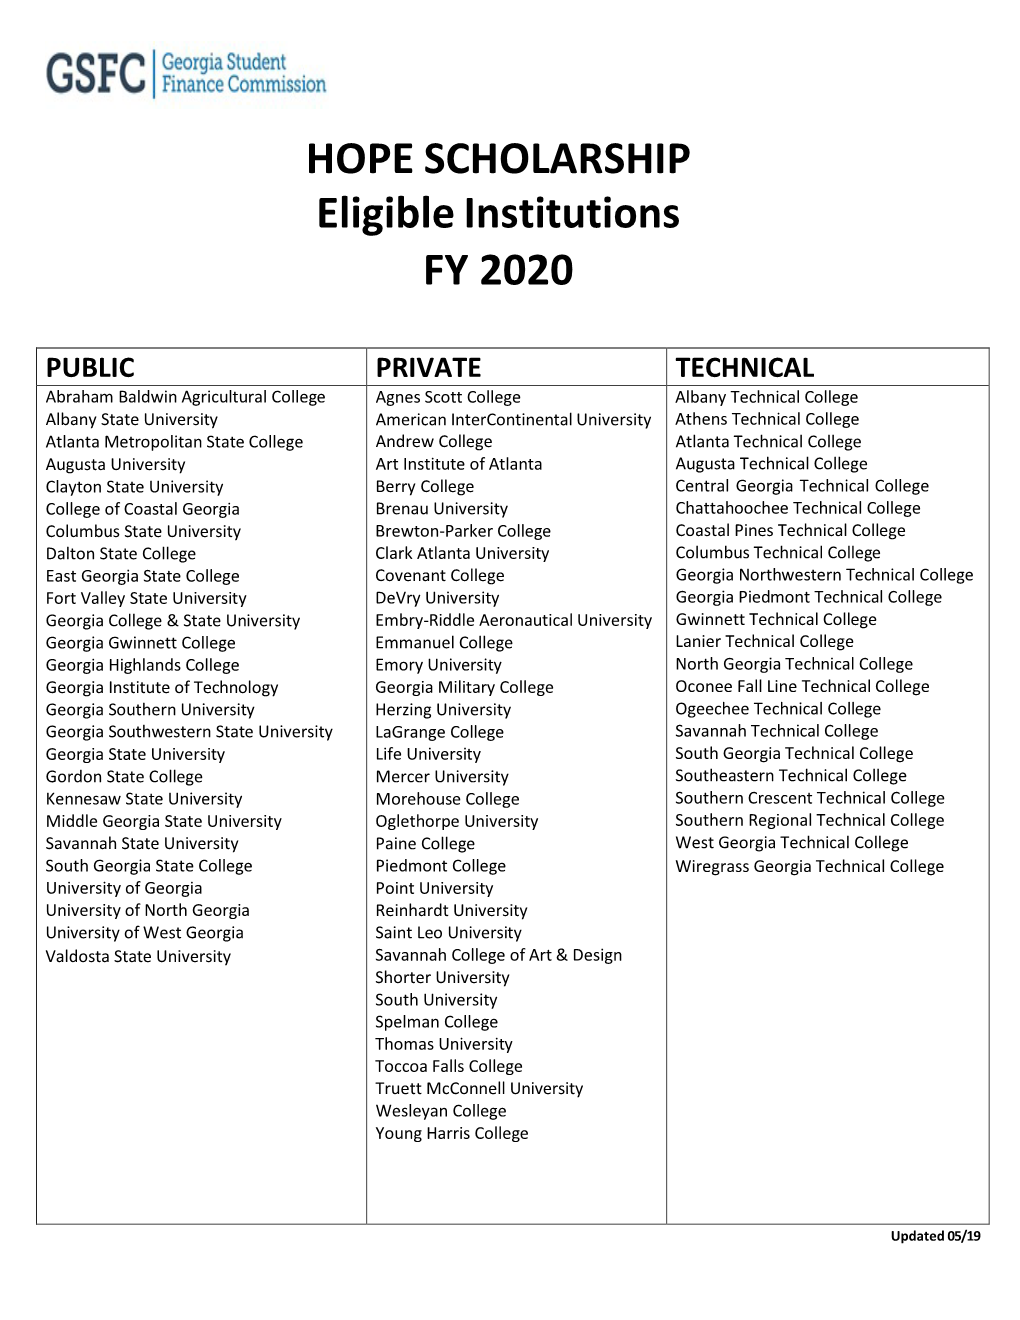 HOPE SCHOLARSHIP Eligible Institutions FY 2020